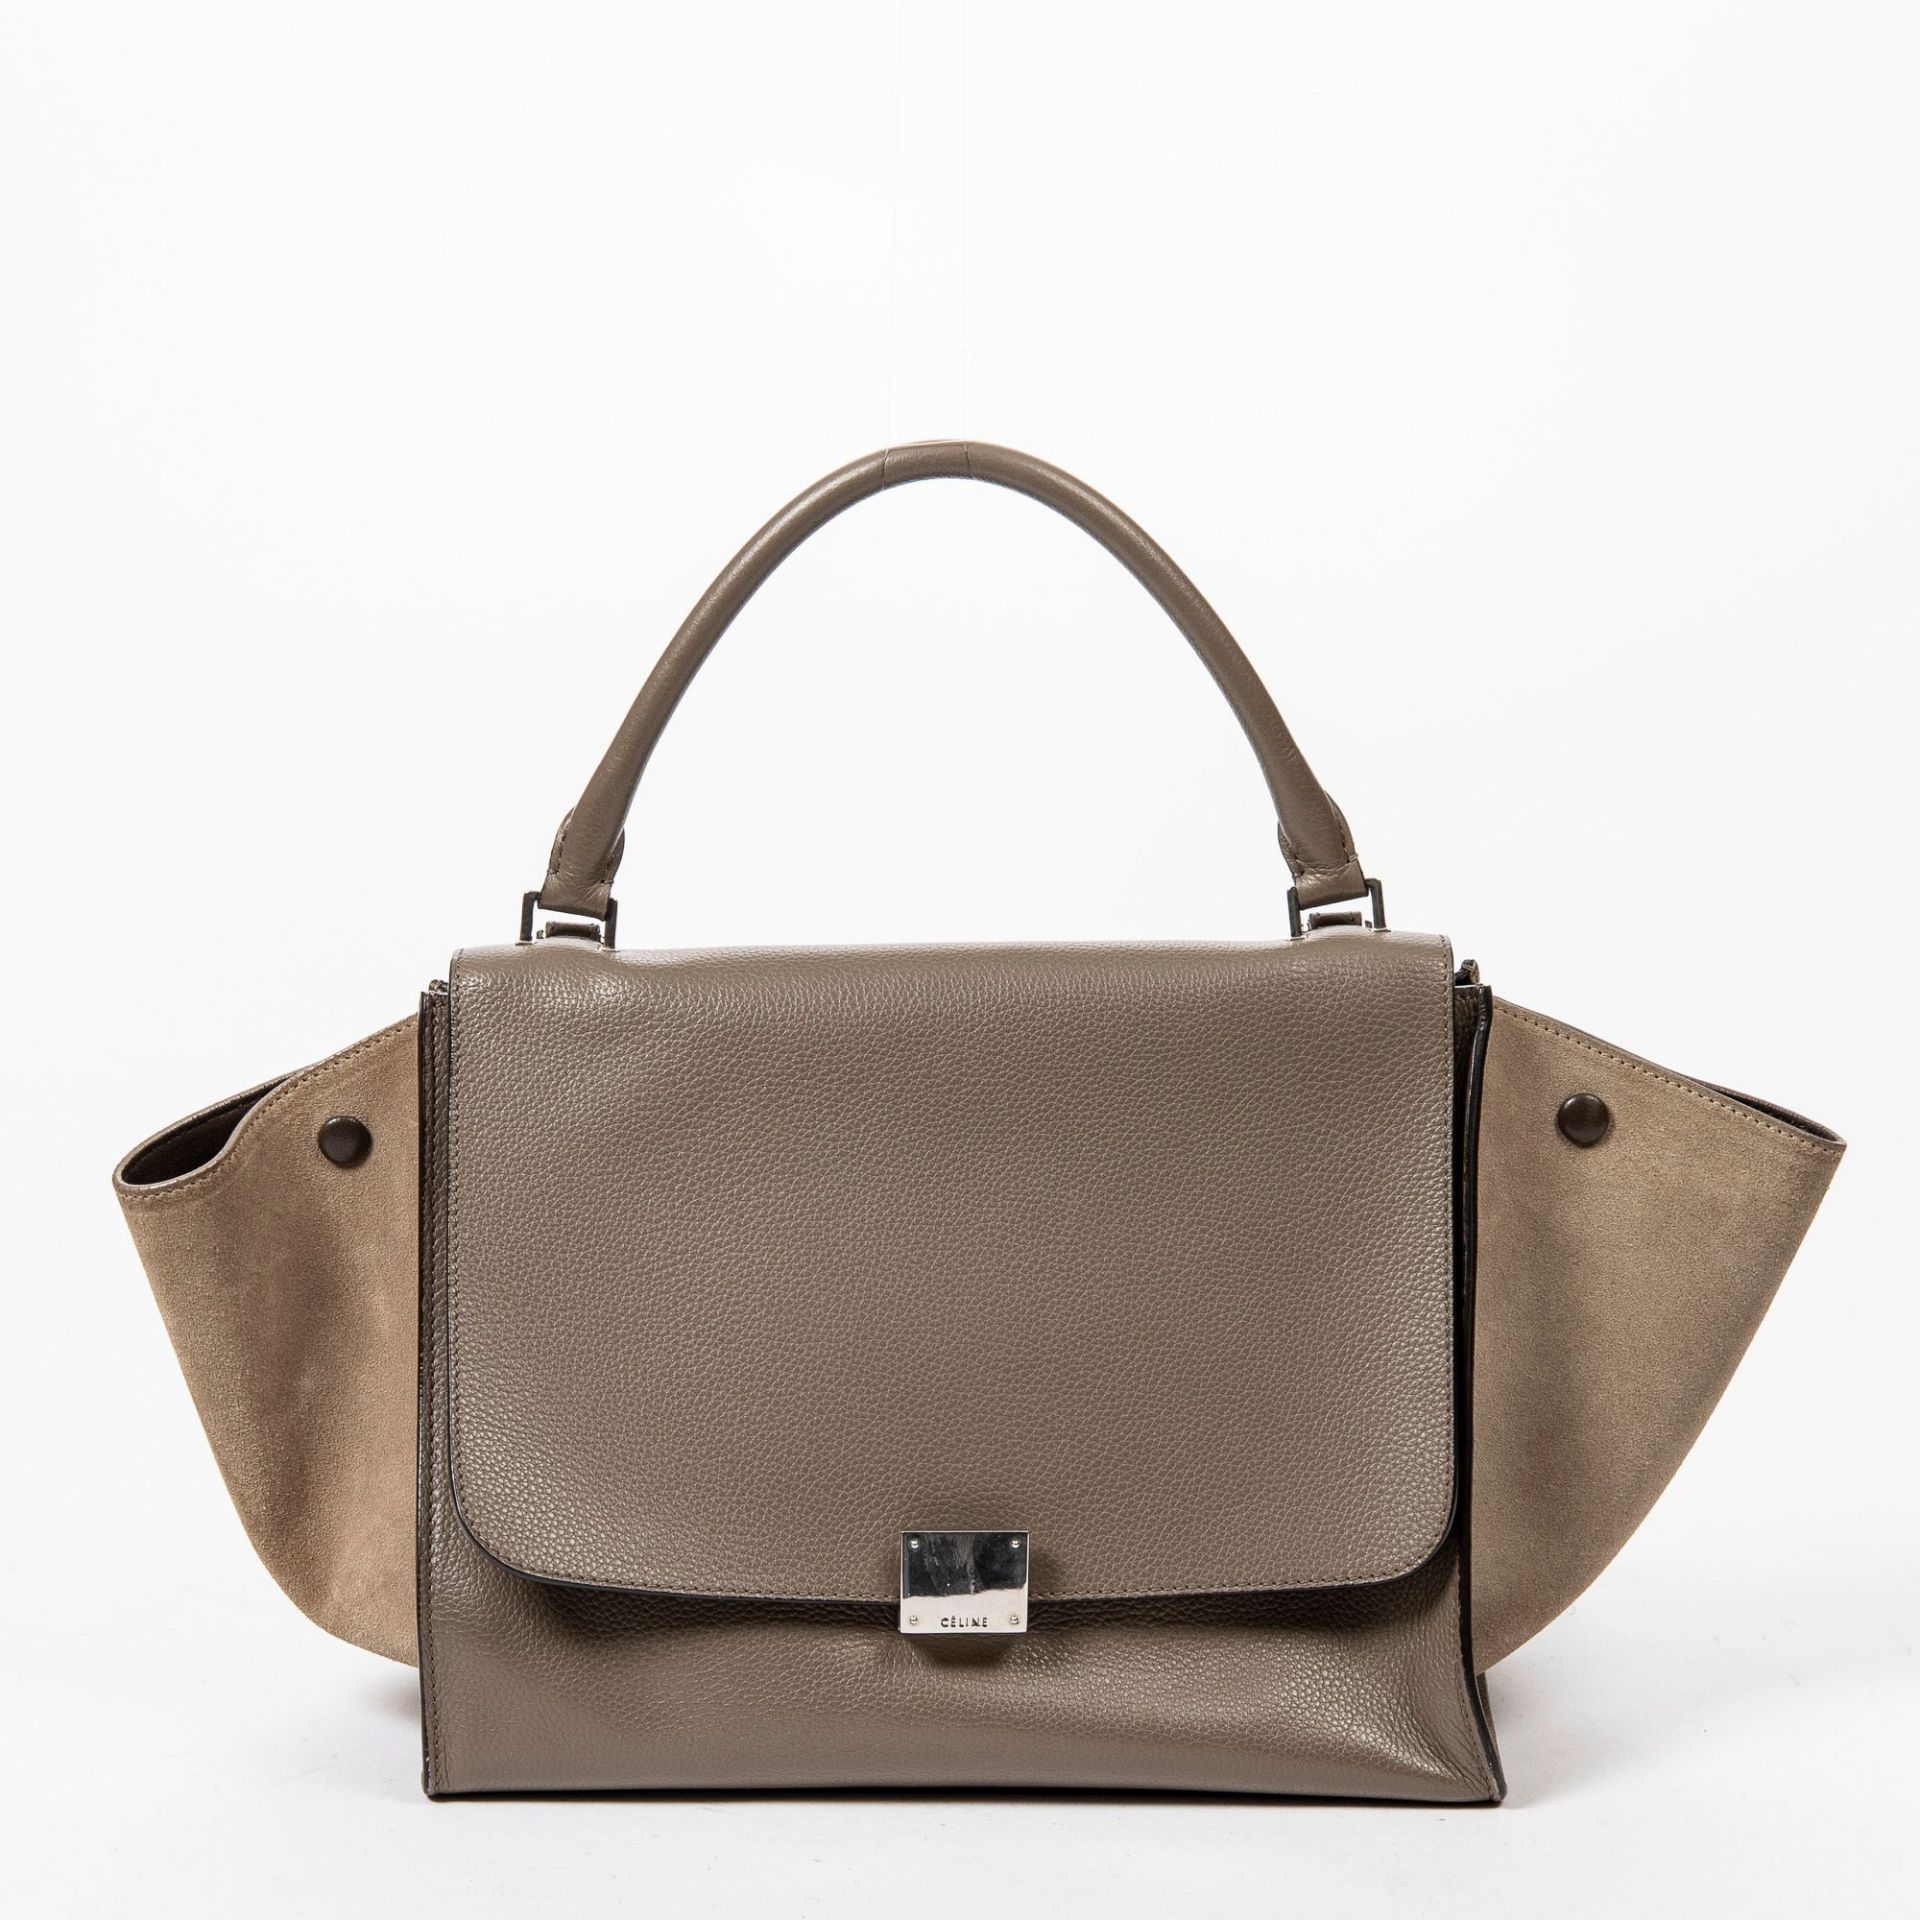 RRP £3770 Celine Trapeze Handbag in Taupe - AAP3730 - Grade A Please Contact Us Directly For